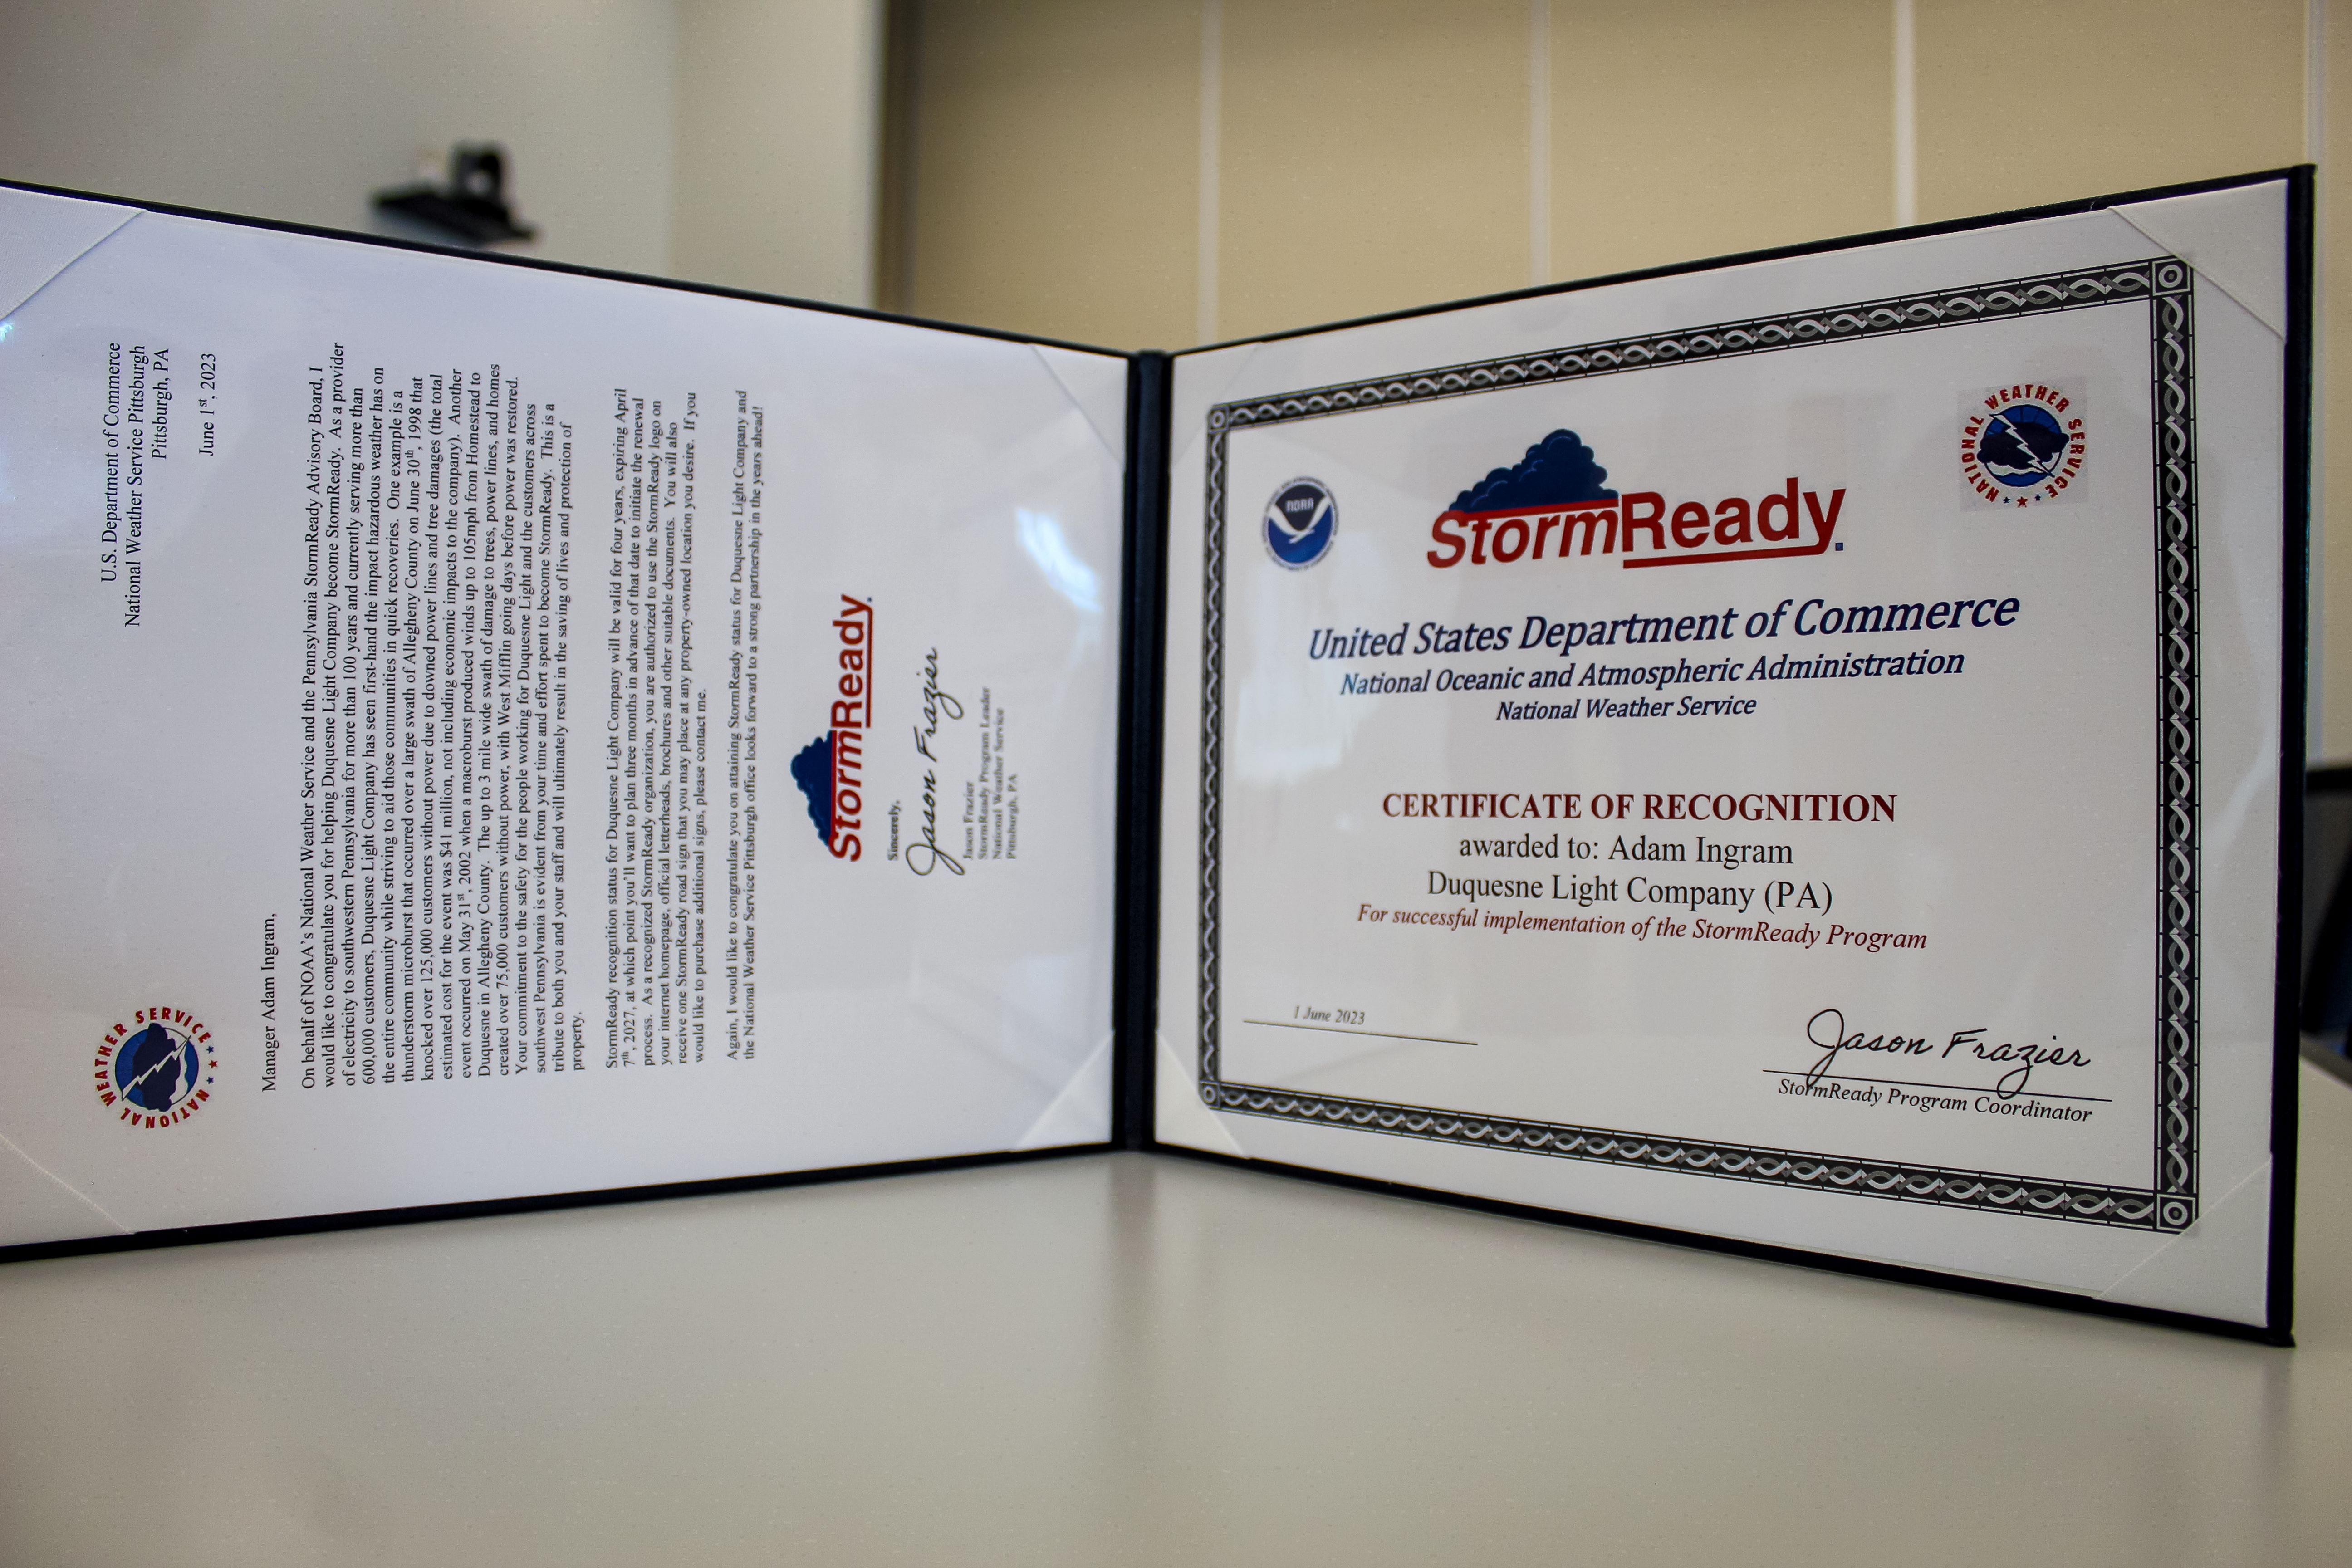 Duquesne Light Company was awarded the StormReady distinction from National Weather Service at a ceremony June 1.